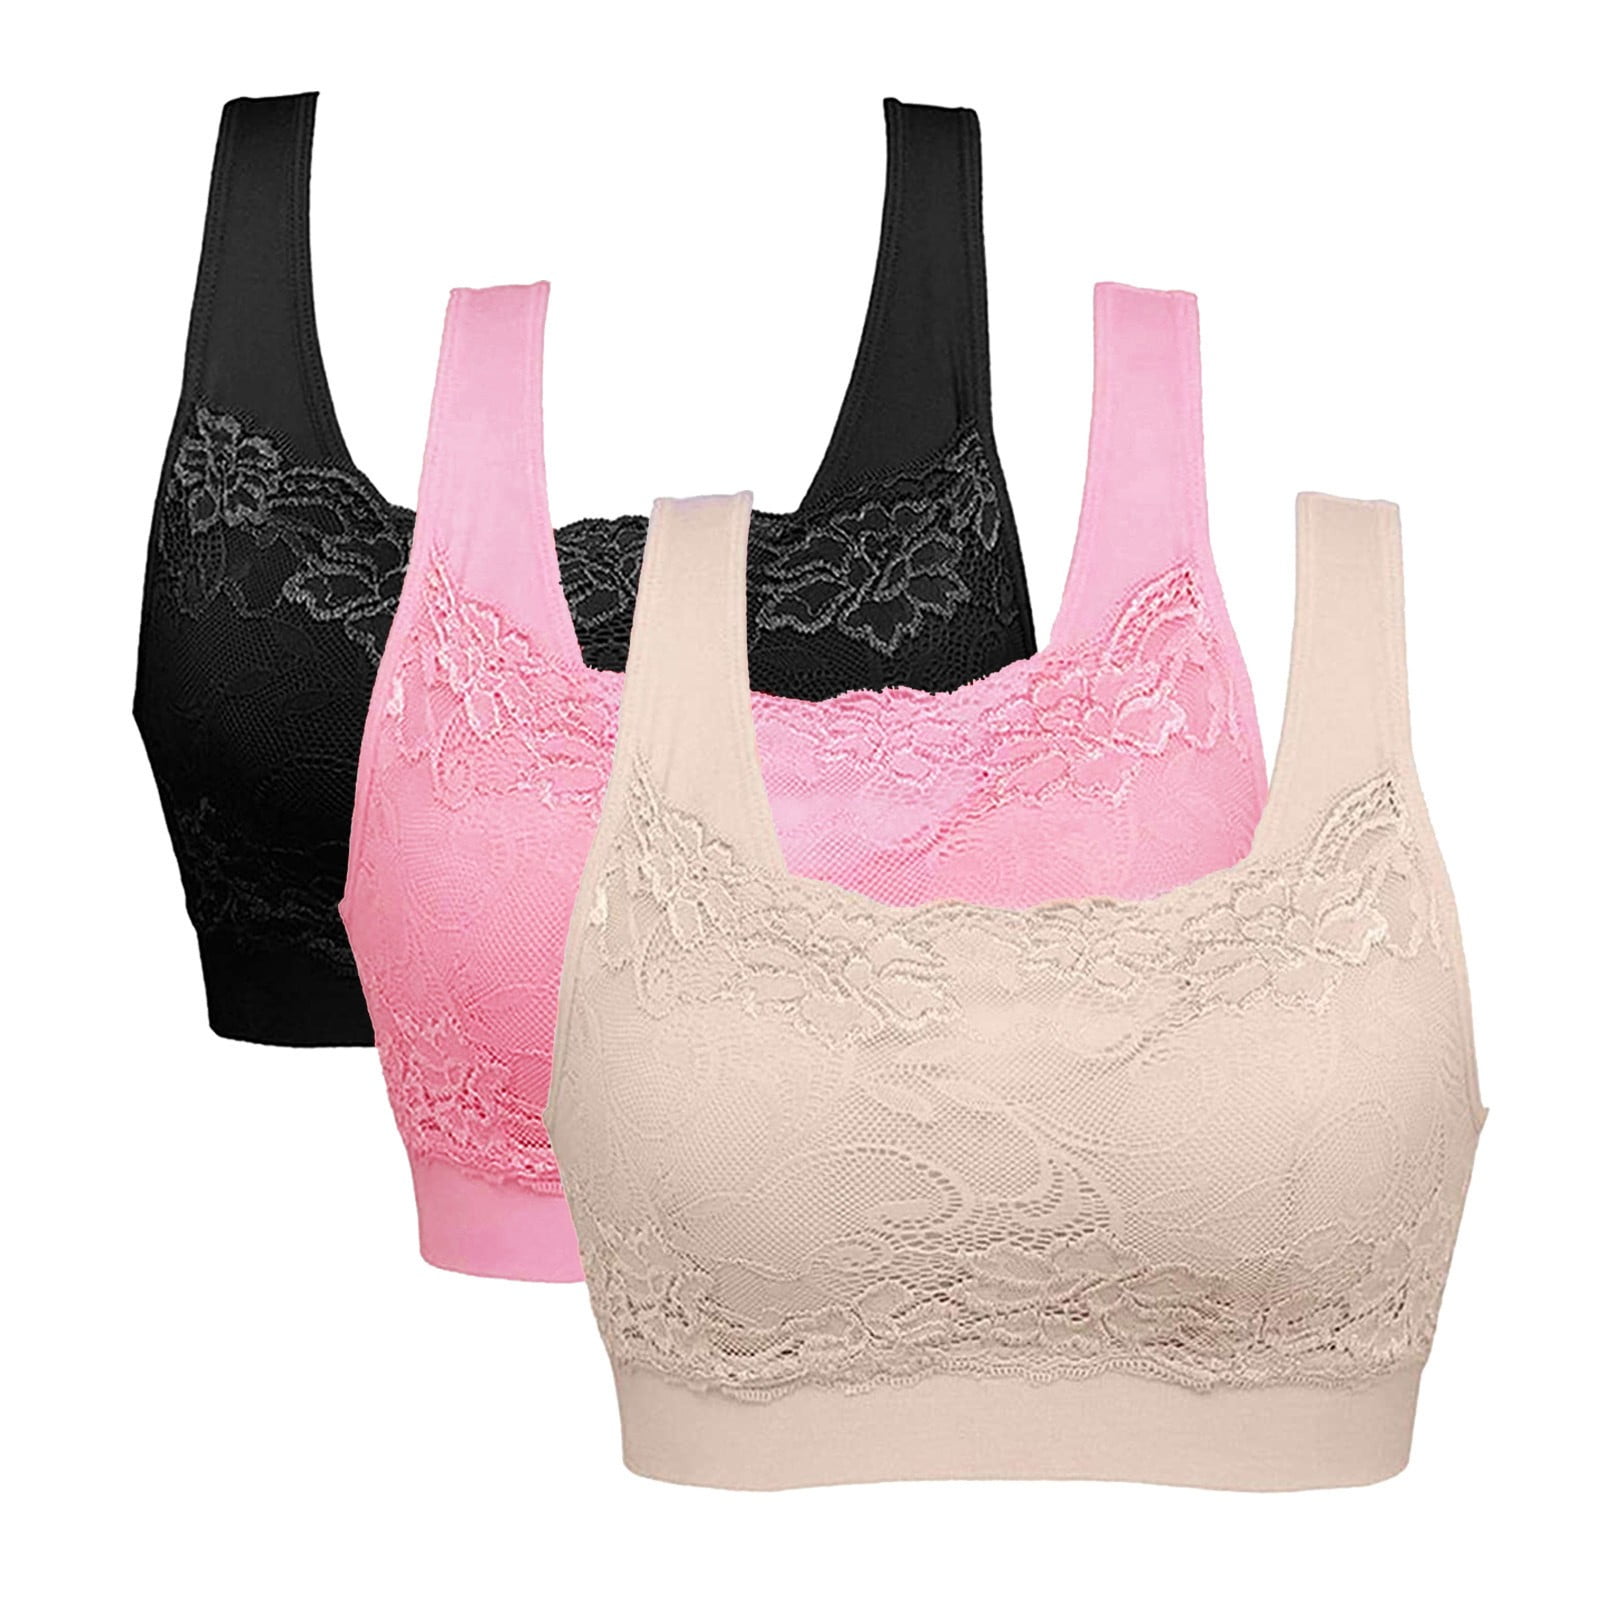 Women JPLZi Women's Seamless Lace Bra Top with Front Lace Cover Sports ...